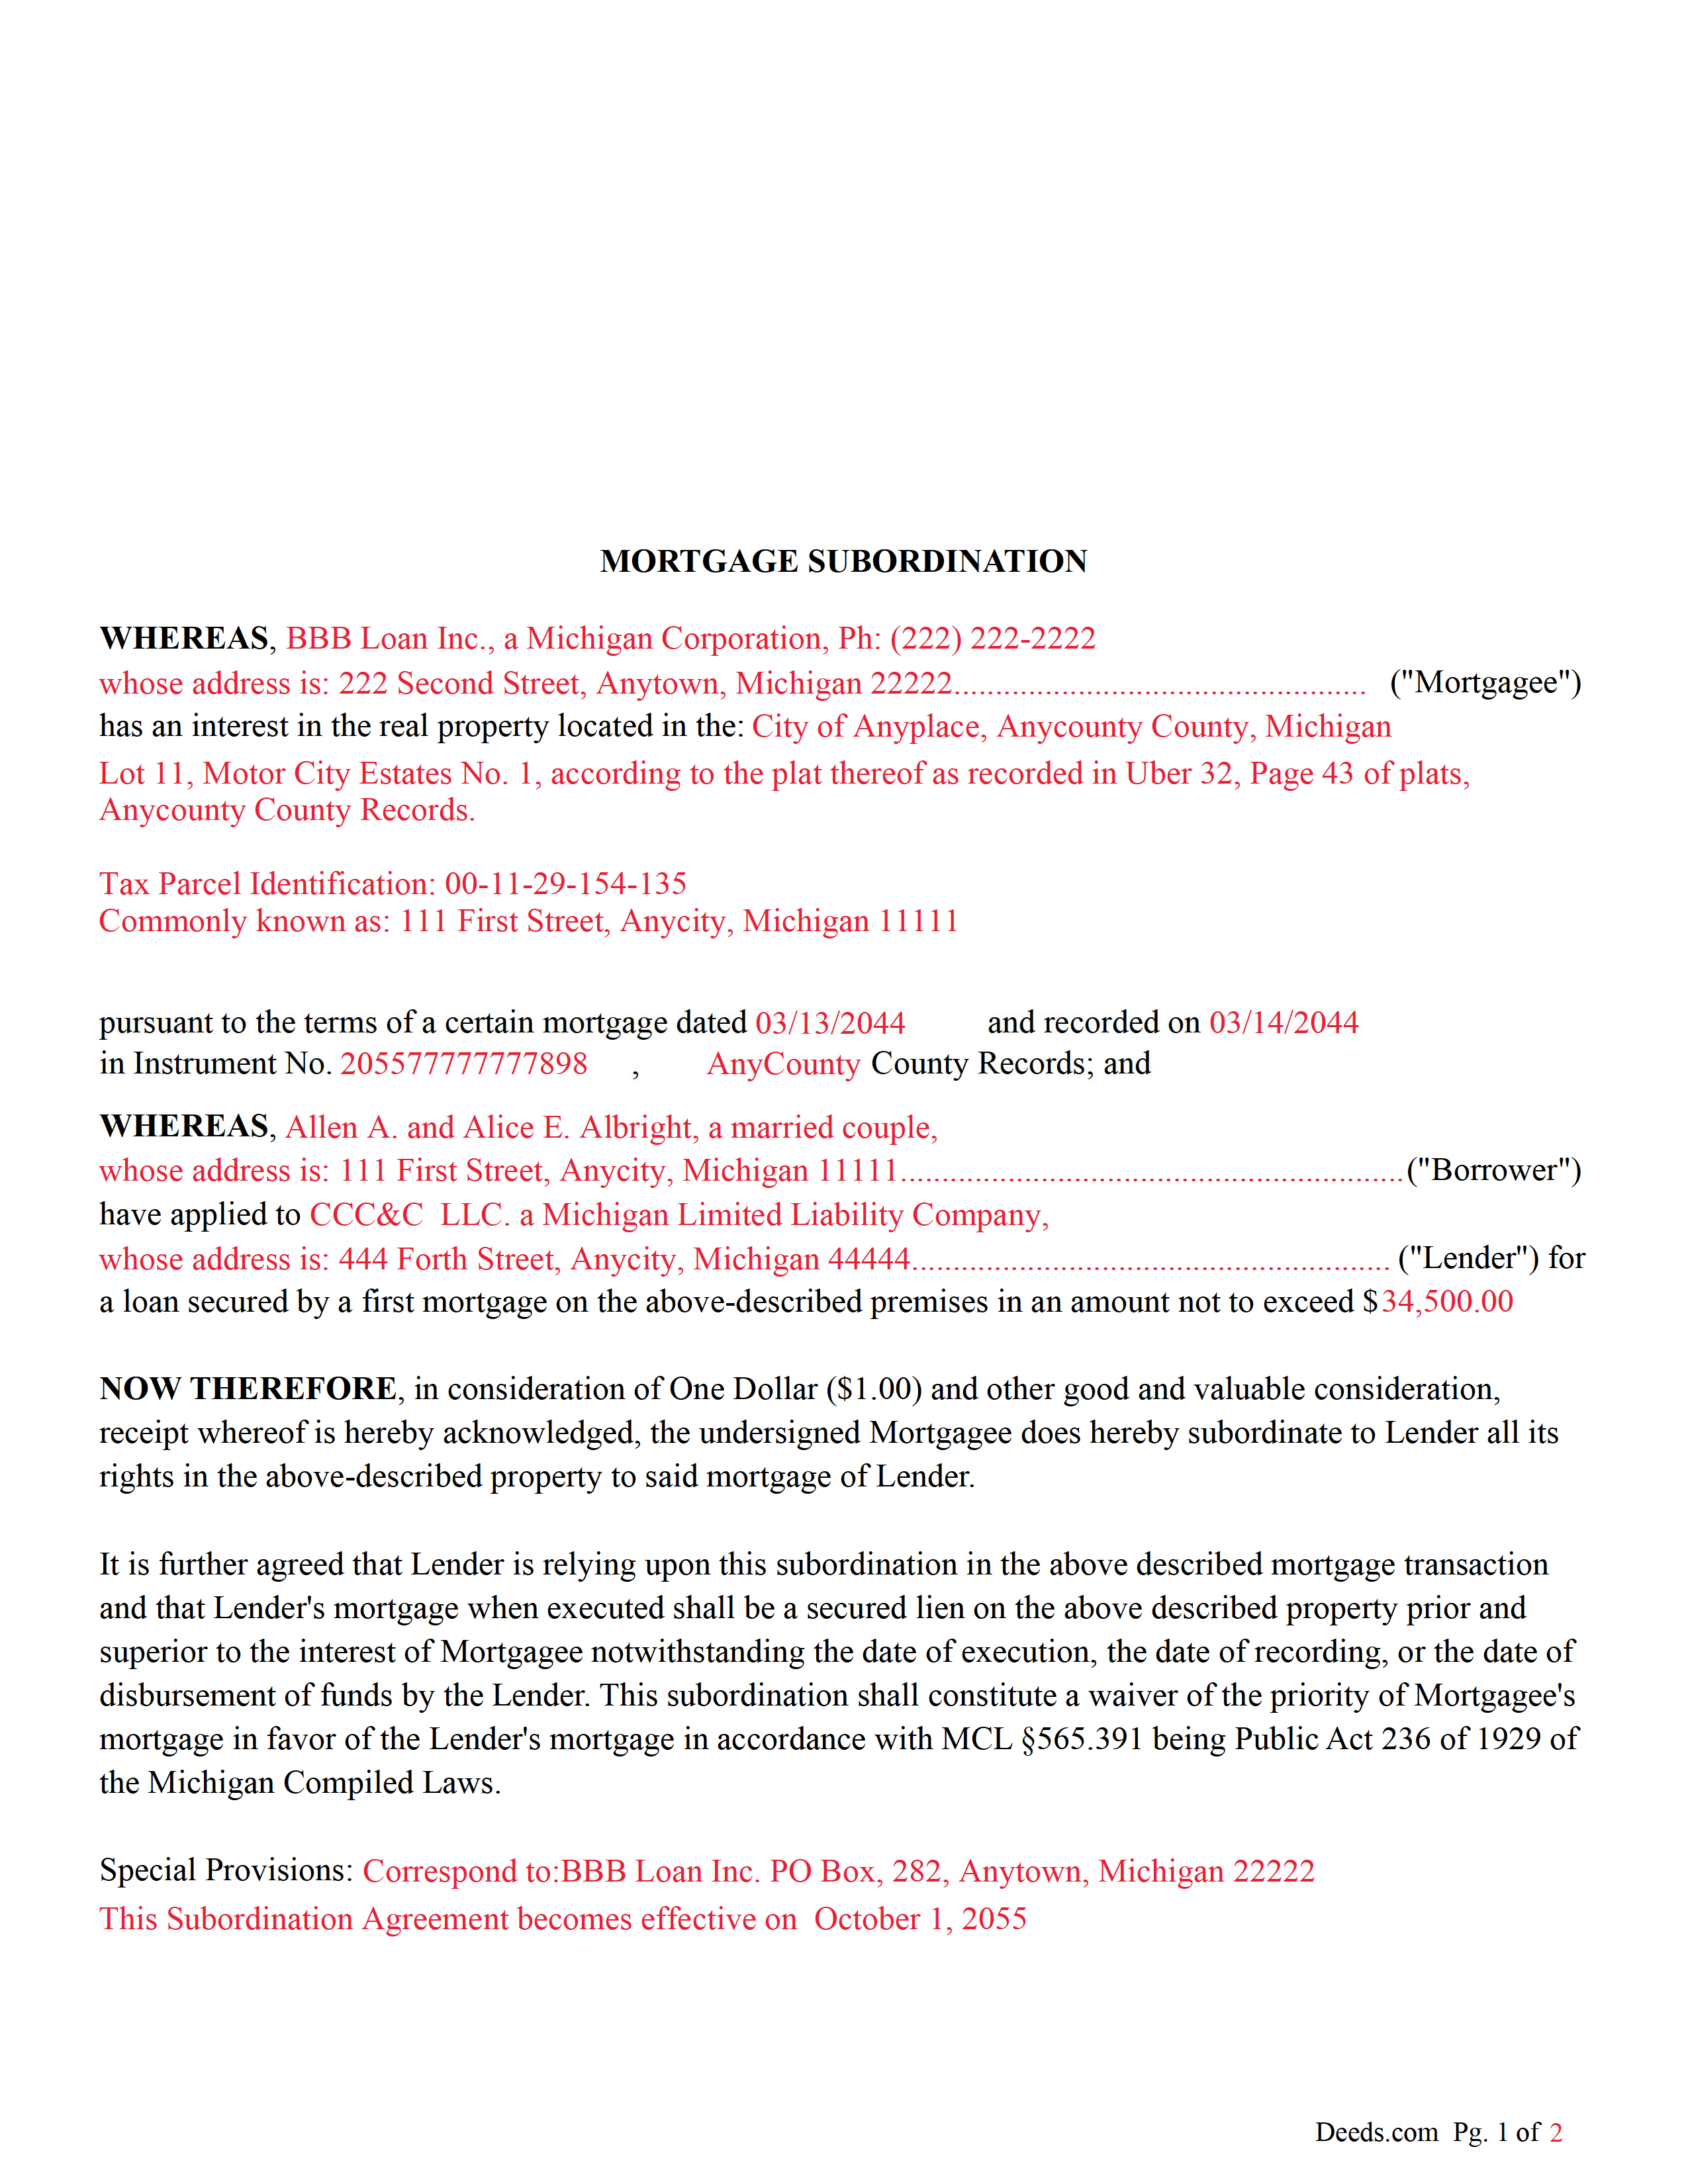 Completed Example of the Mortgage Subordination Document